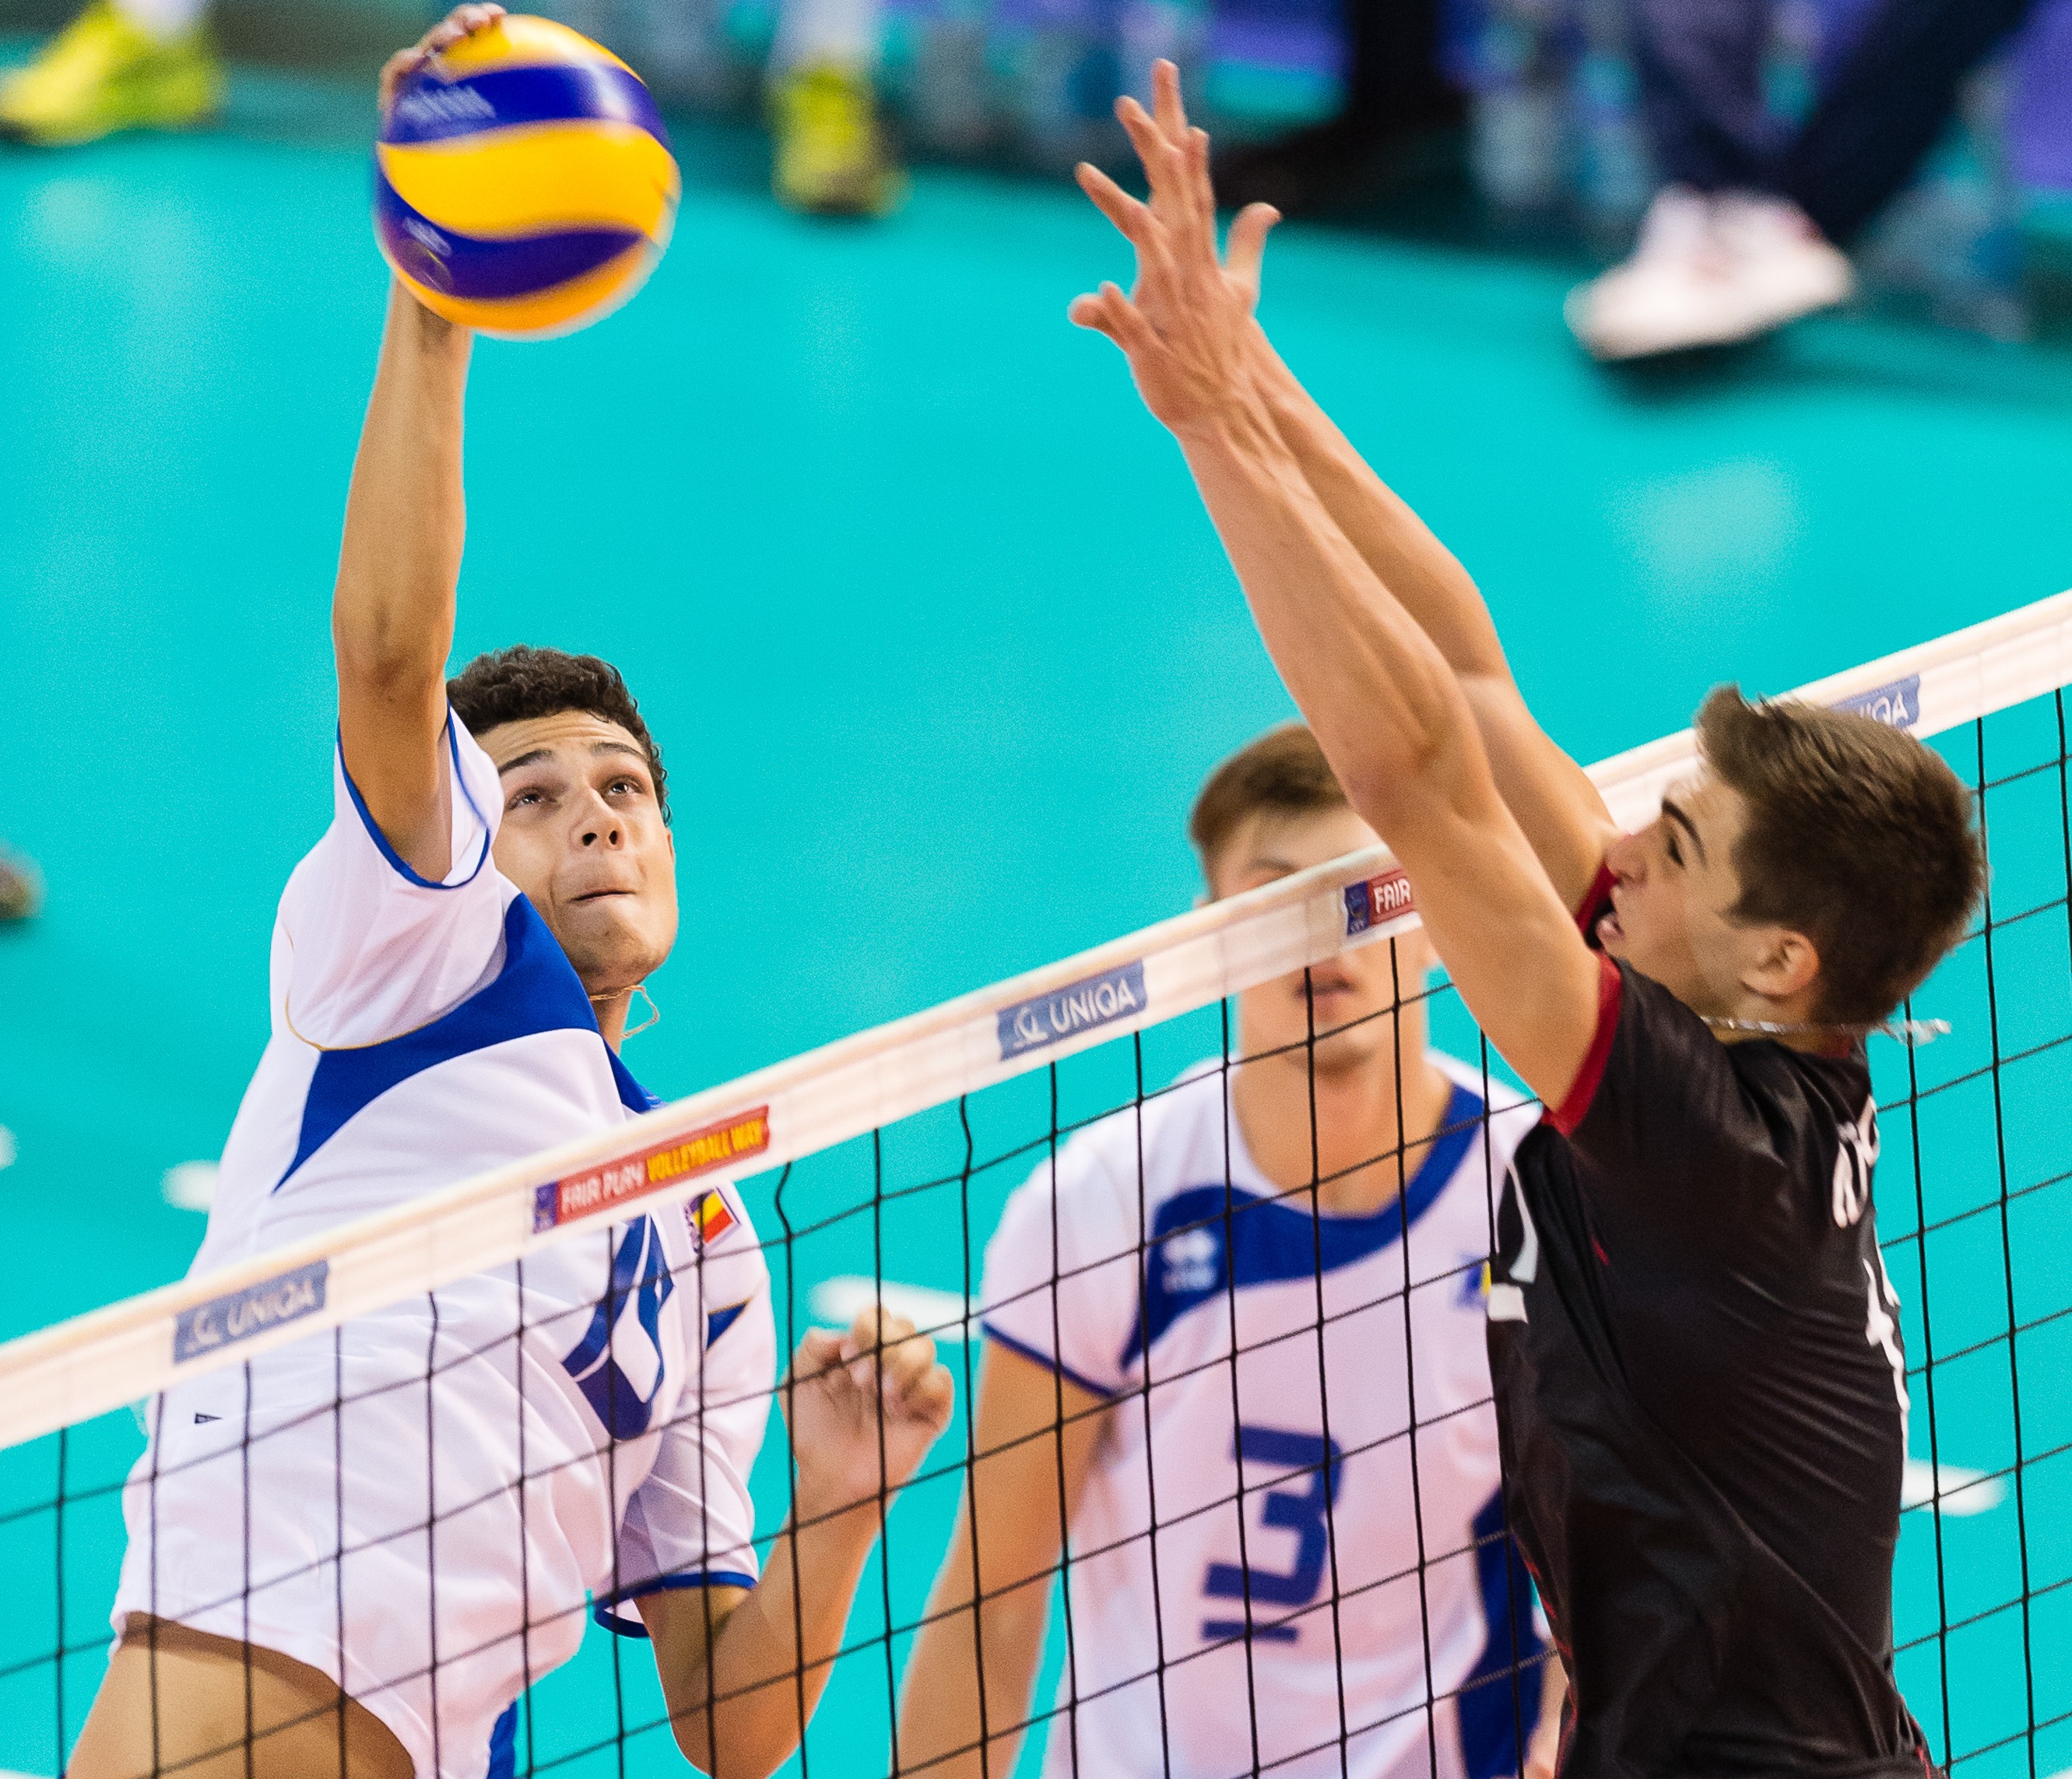 European Championships youngest player receives chance to shine and uses it well CEV